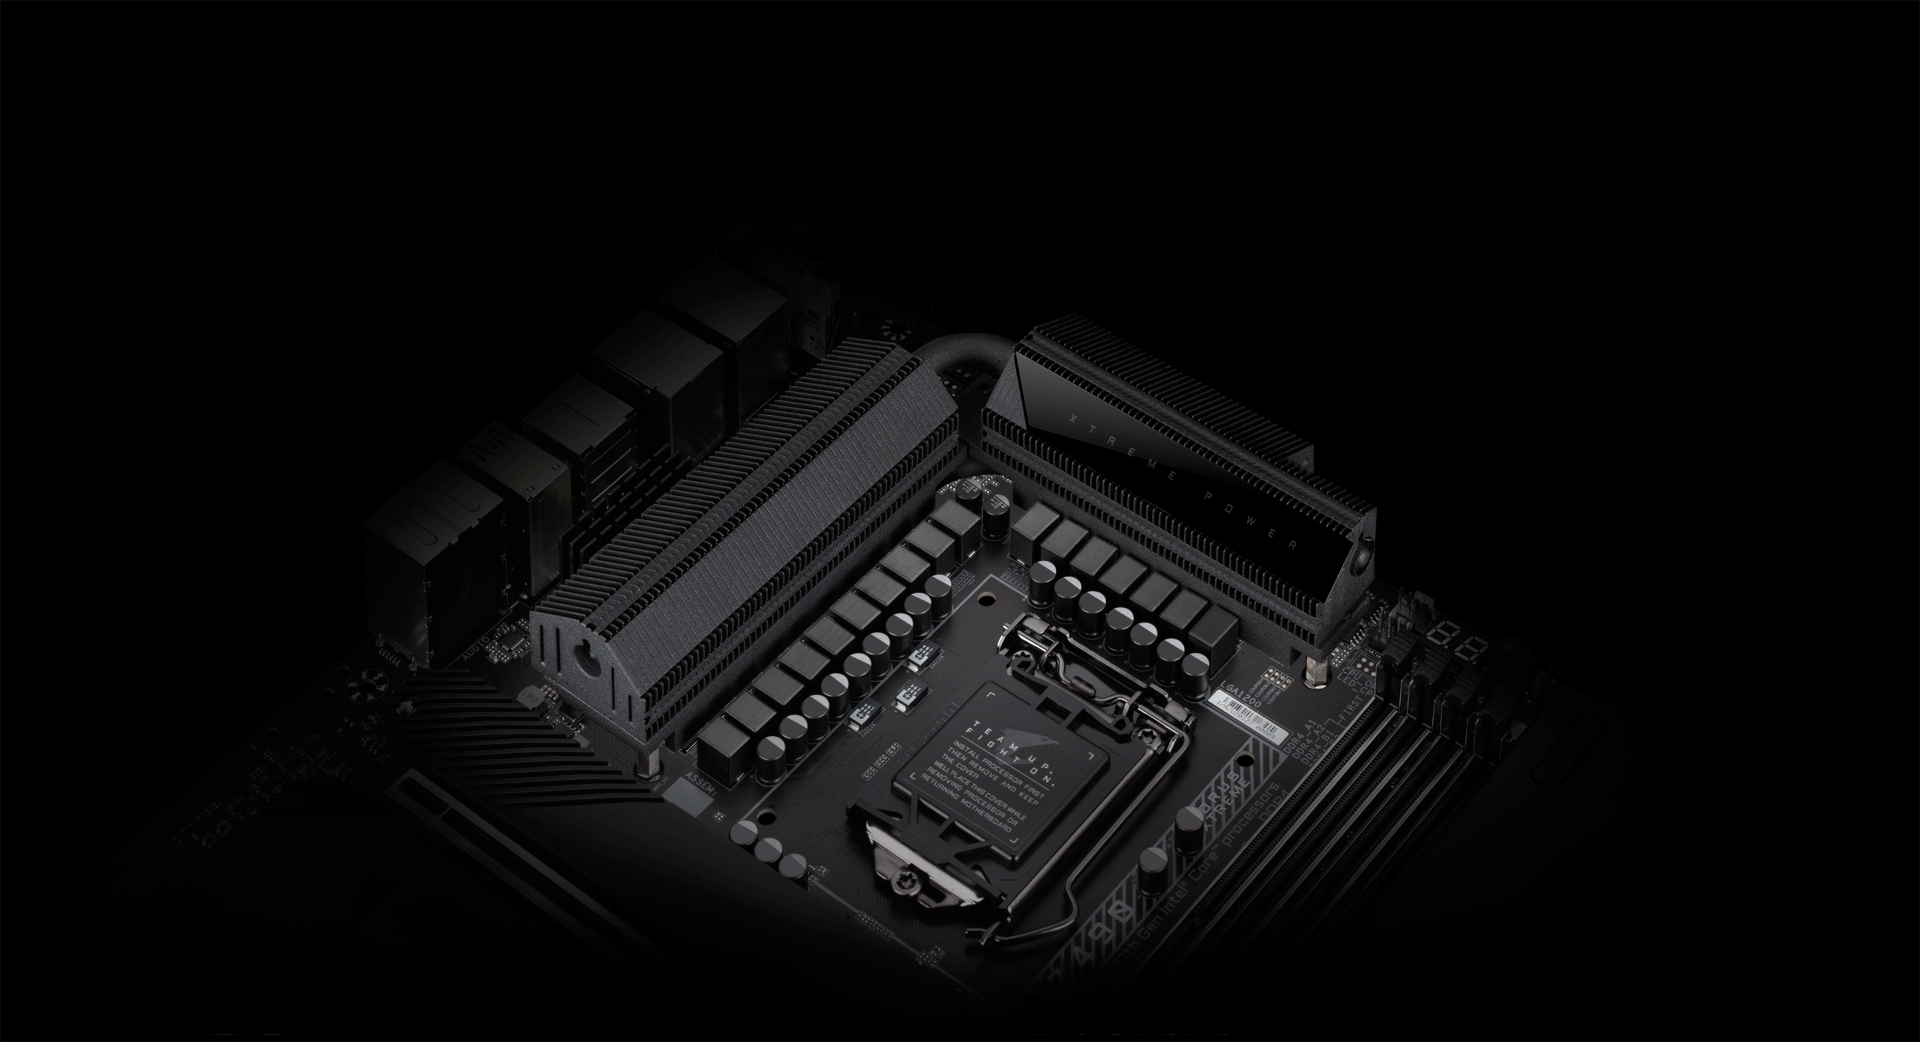  EXTREME THERMAL DESIGN of the motherboard